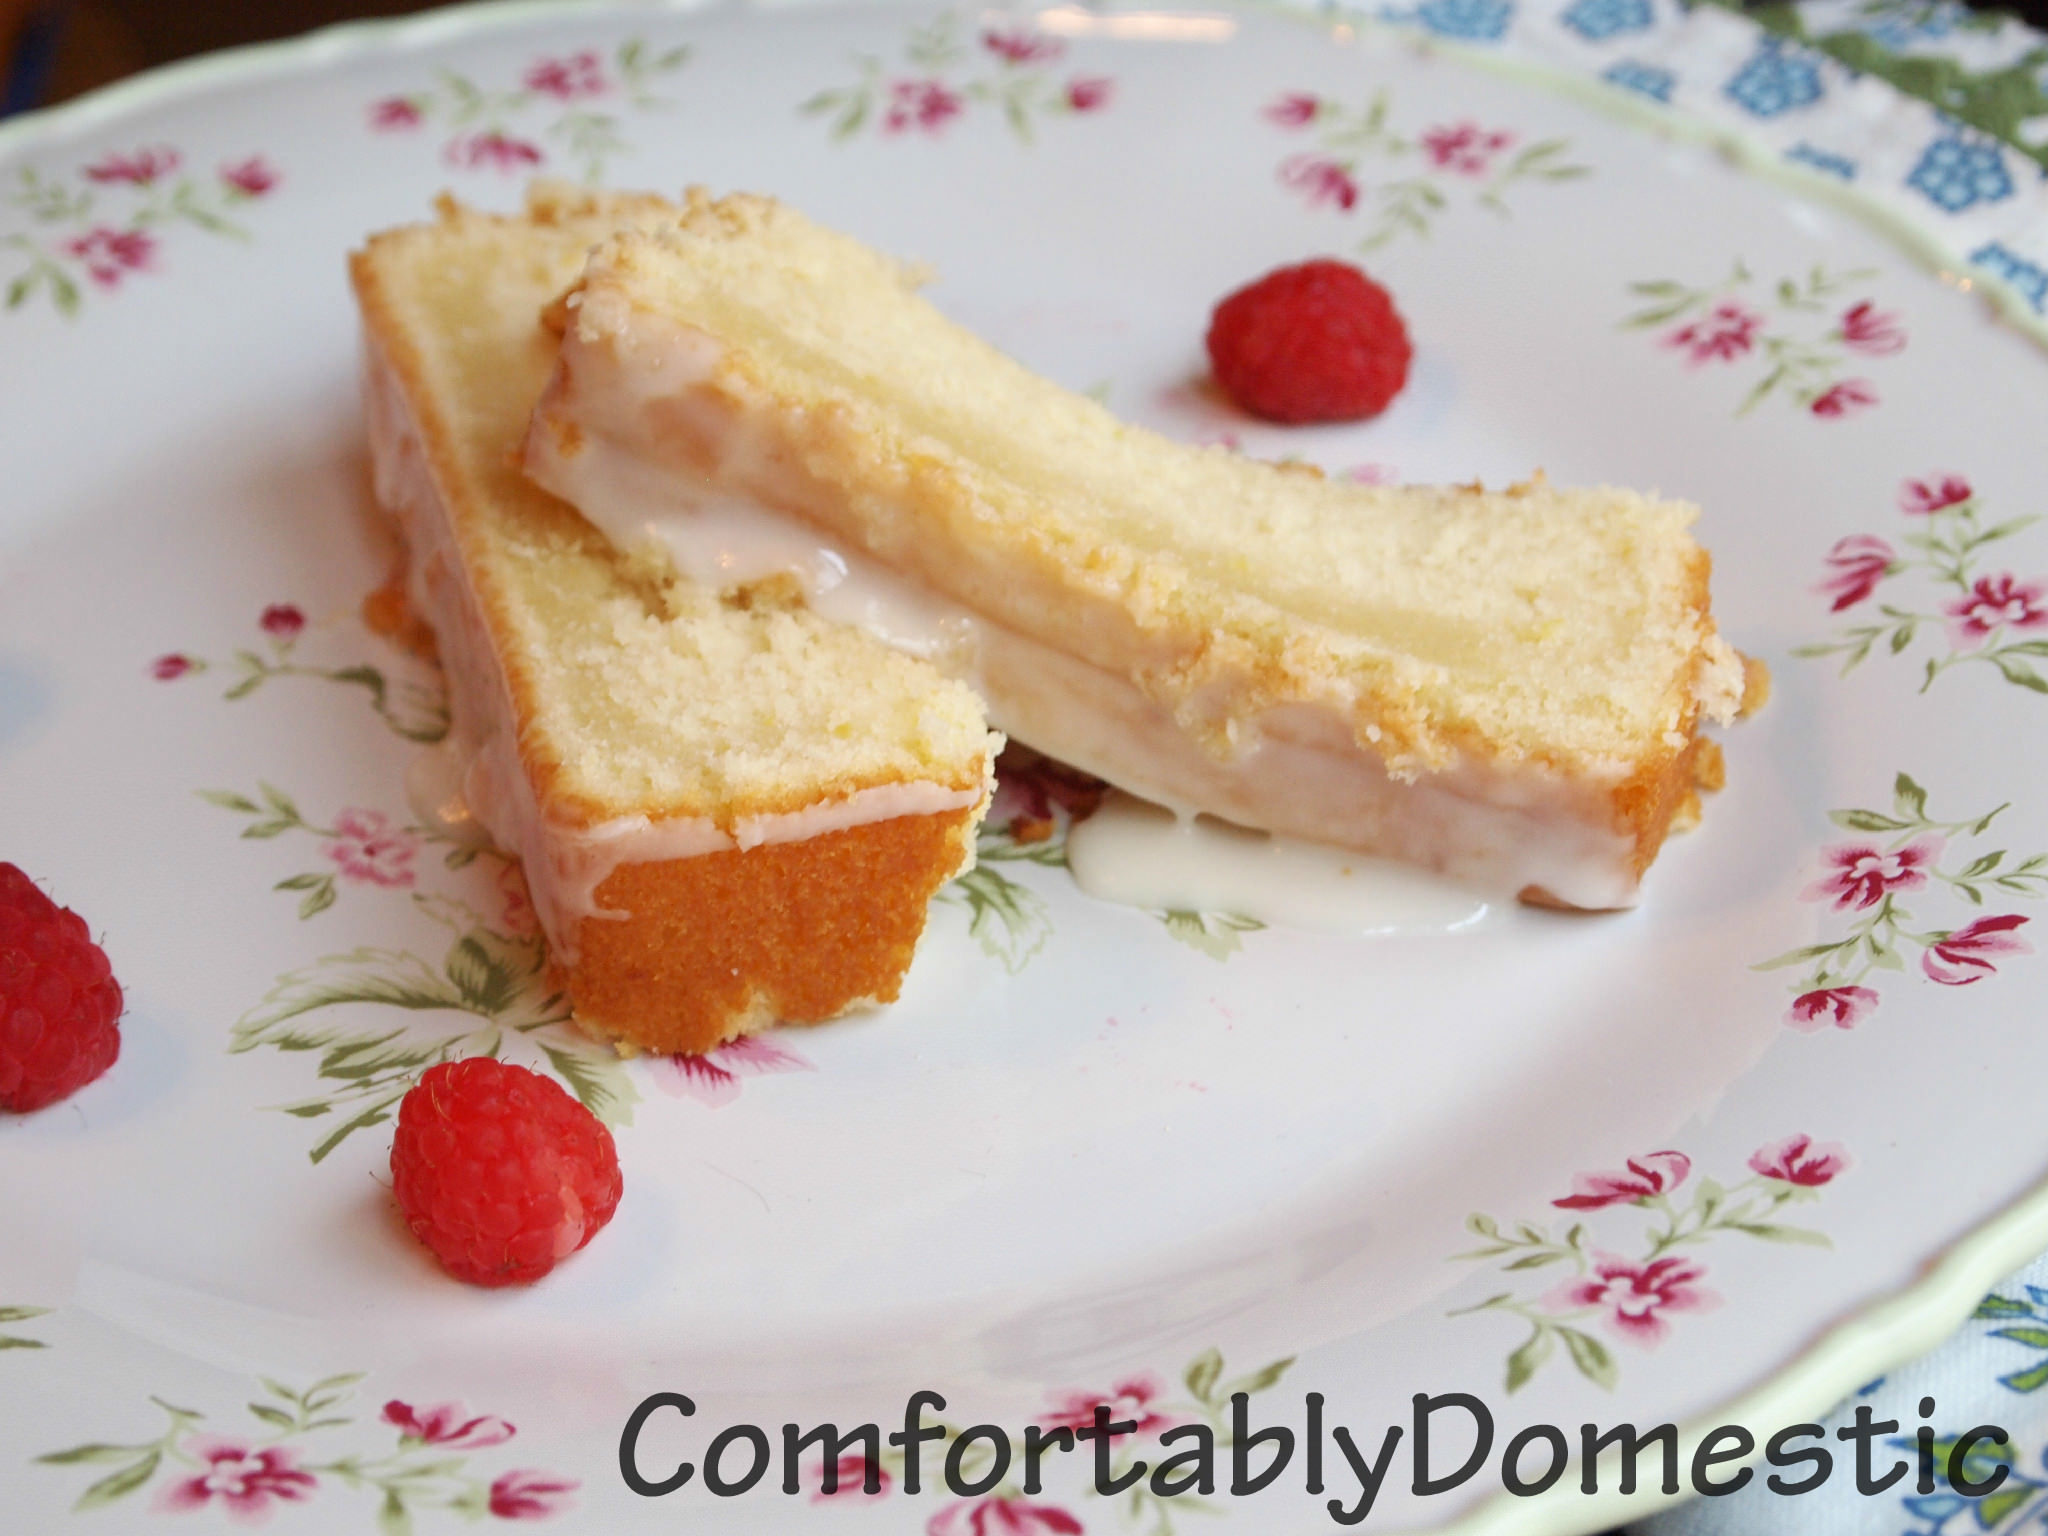 Iced lemon loaf is the perfect treat with a cup of coffee. Now there's no need to get it at the local coffee shop, because you can make it at home for a fraction of the cost! | ComfortablyDomestic.com